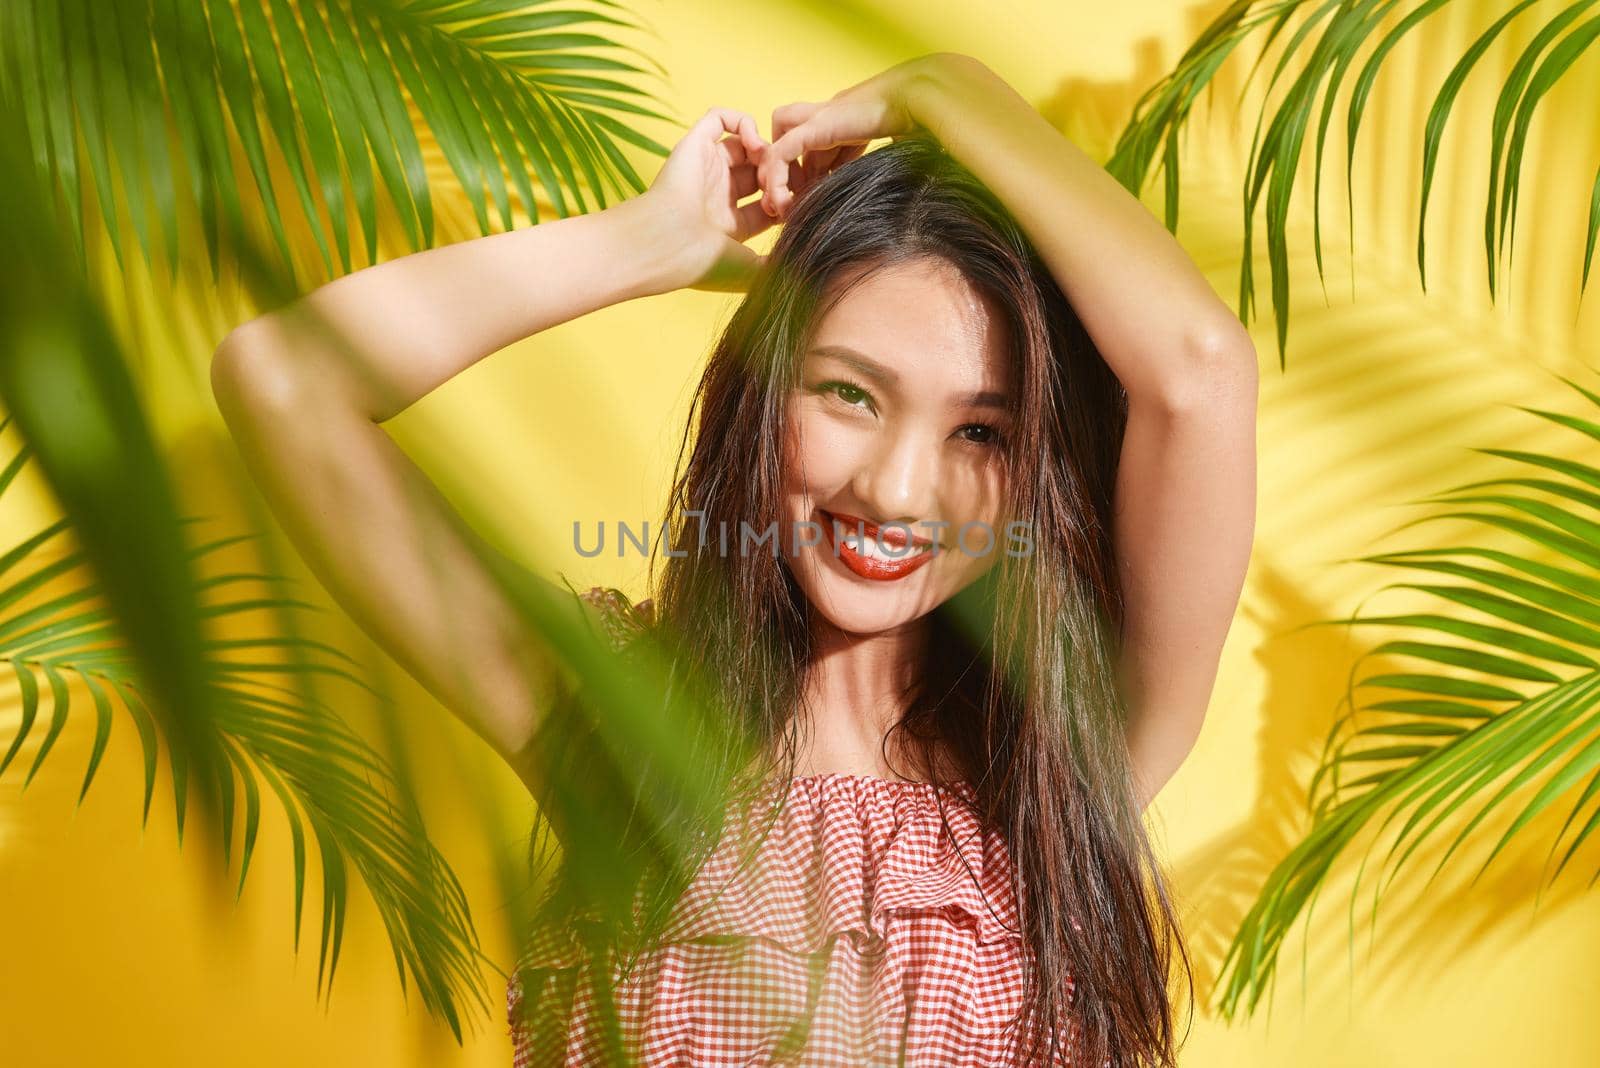 A beautiful girl with wet hair stands among palm leaves in yellow background by makidotvn